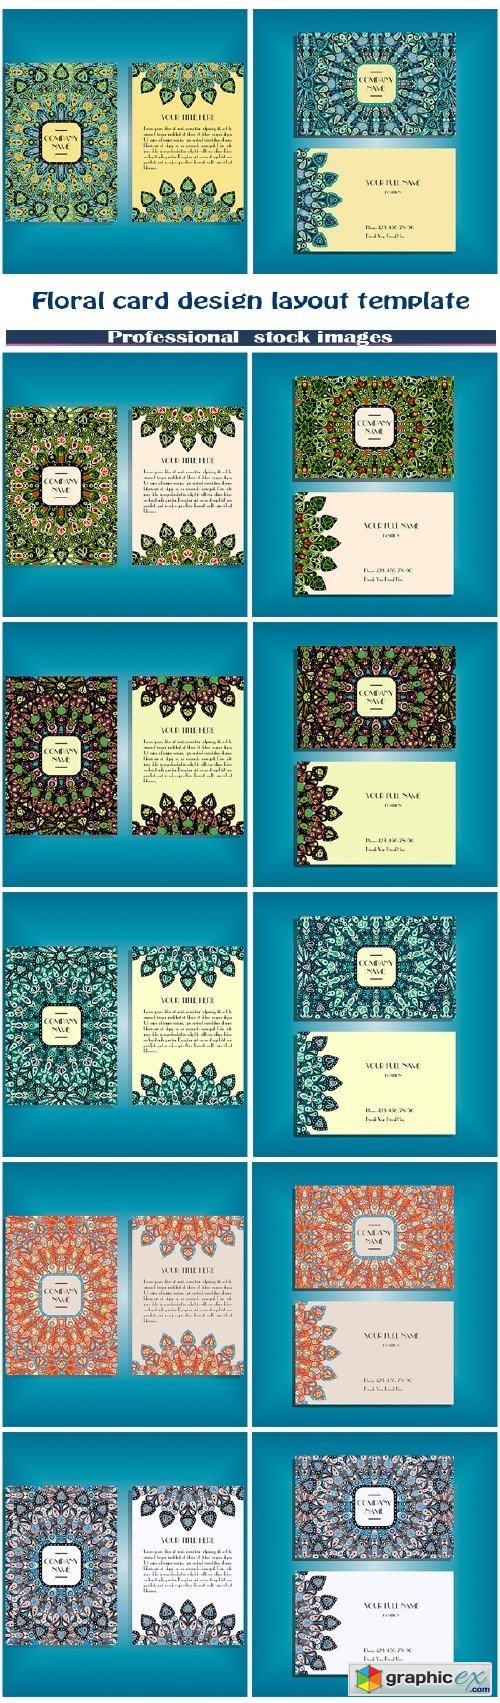 Floral card design layout template